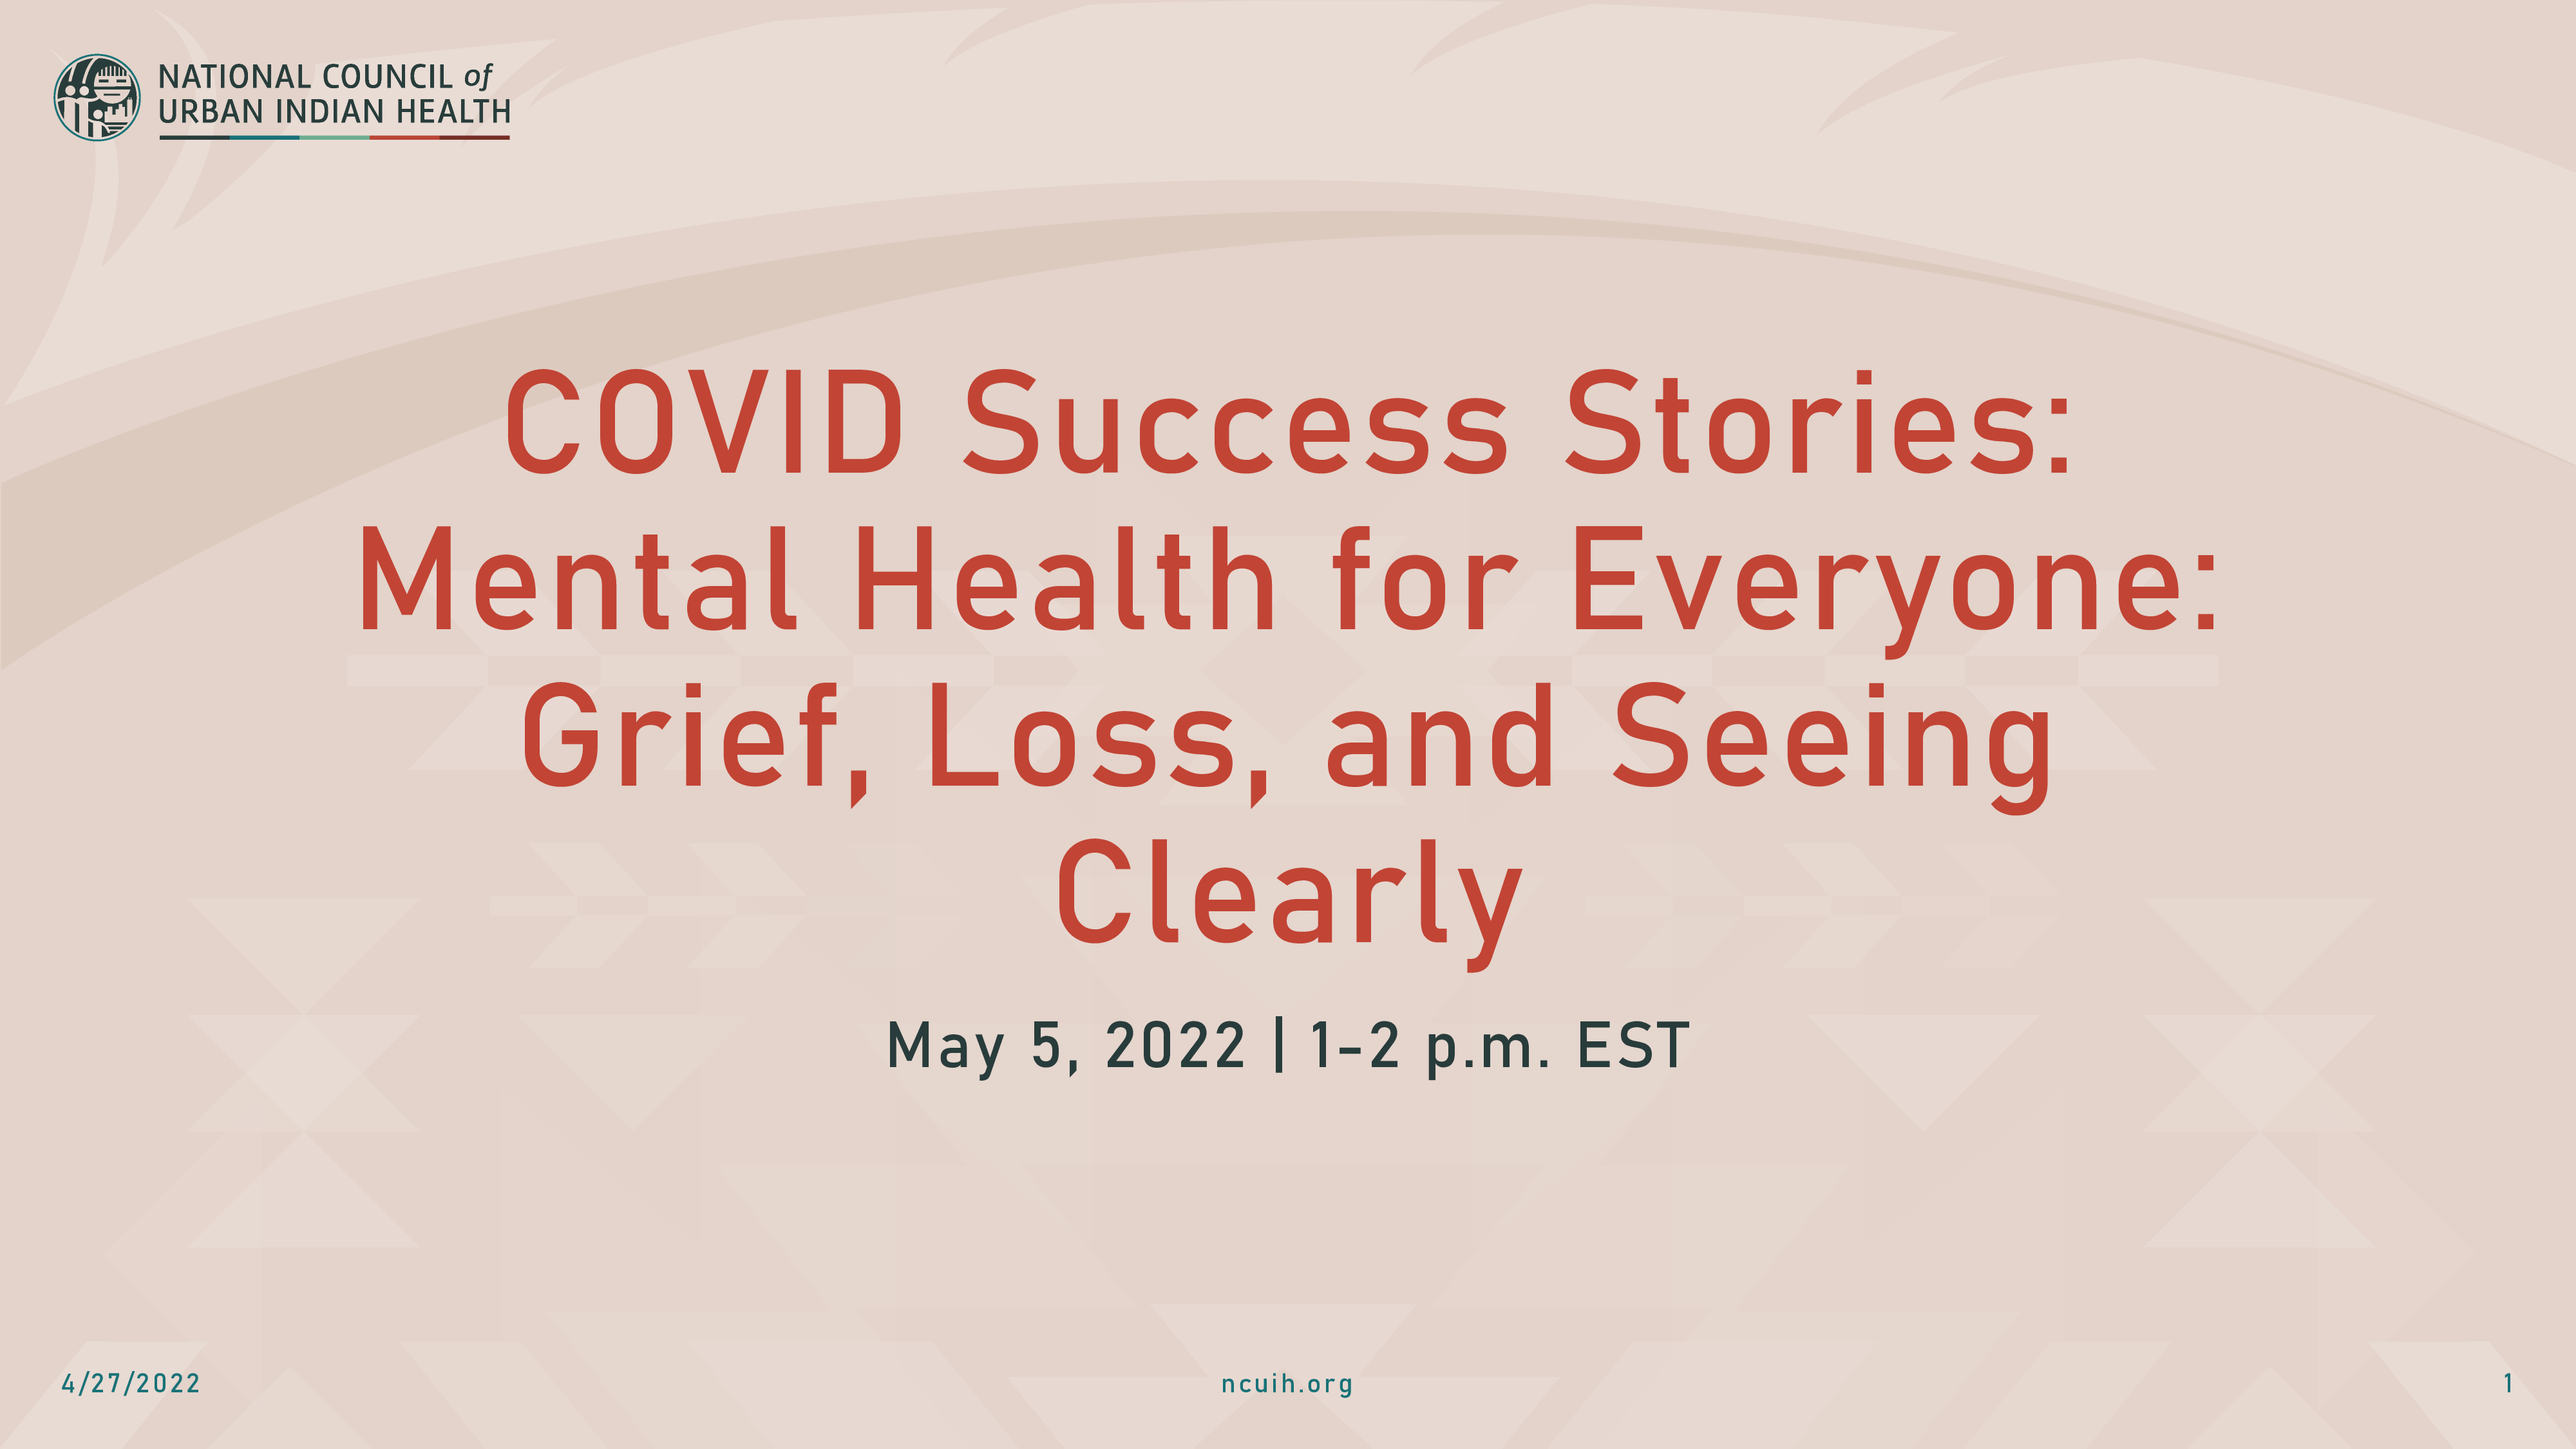 Title slide of "COVID Success Stories: Mental Health for Everyone: Grief, Loss, and Seeing Clearly" presentation held on May 5, 2022.